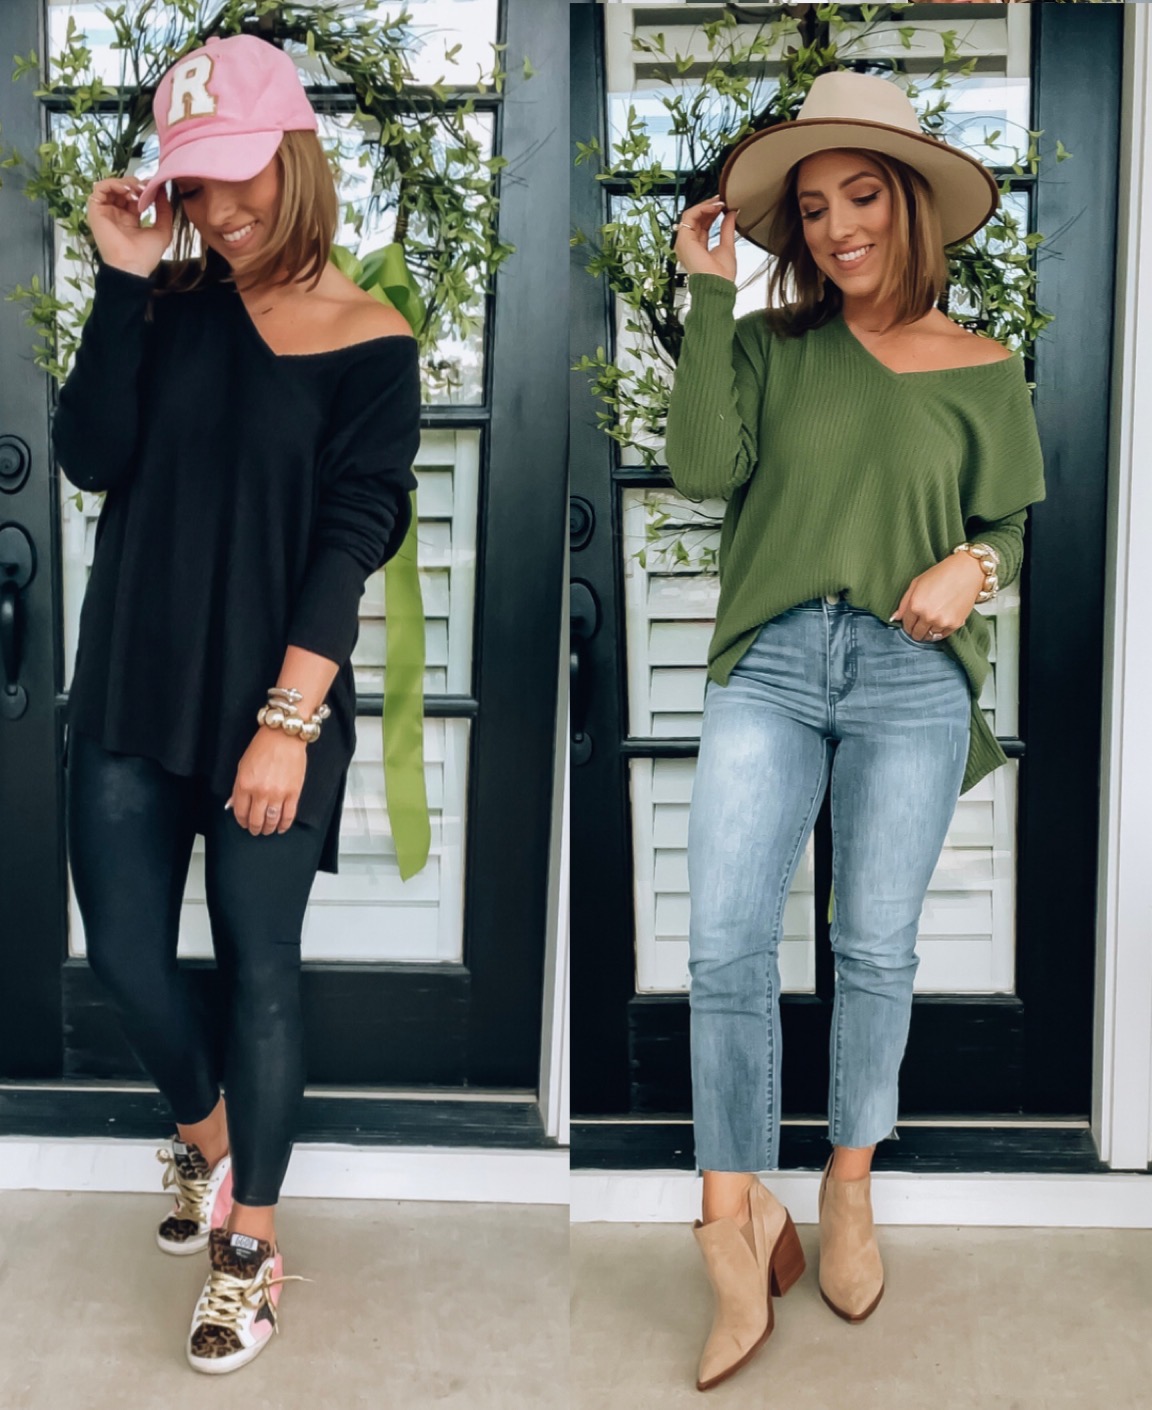 Walmart Fall Fashion Finds - Something Delightful Blog #WalmartFashion #WalmartStyle #WalmartHaul #WalmartFall2022 #Fall2022Trends